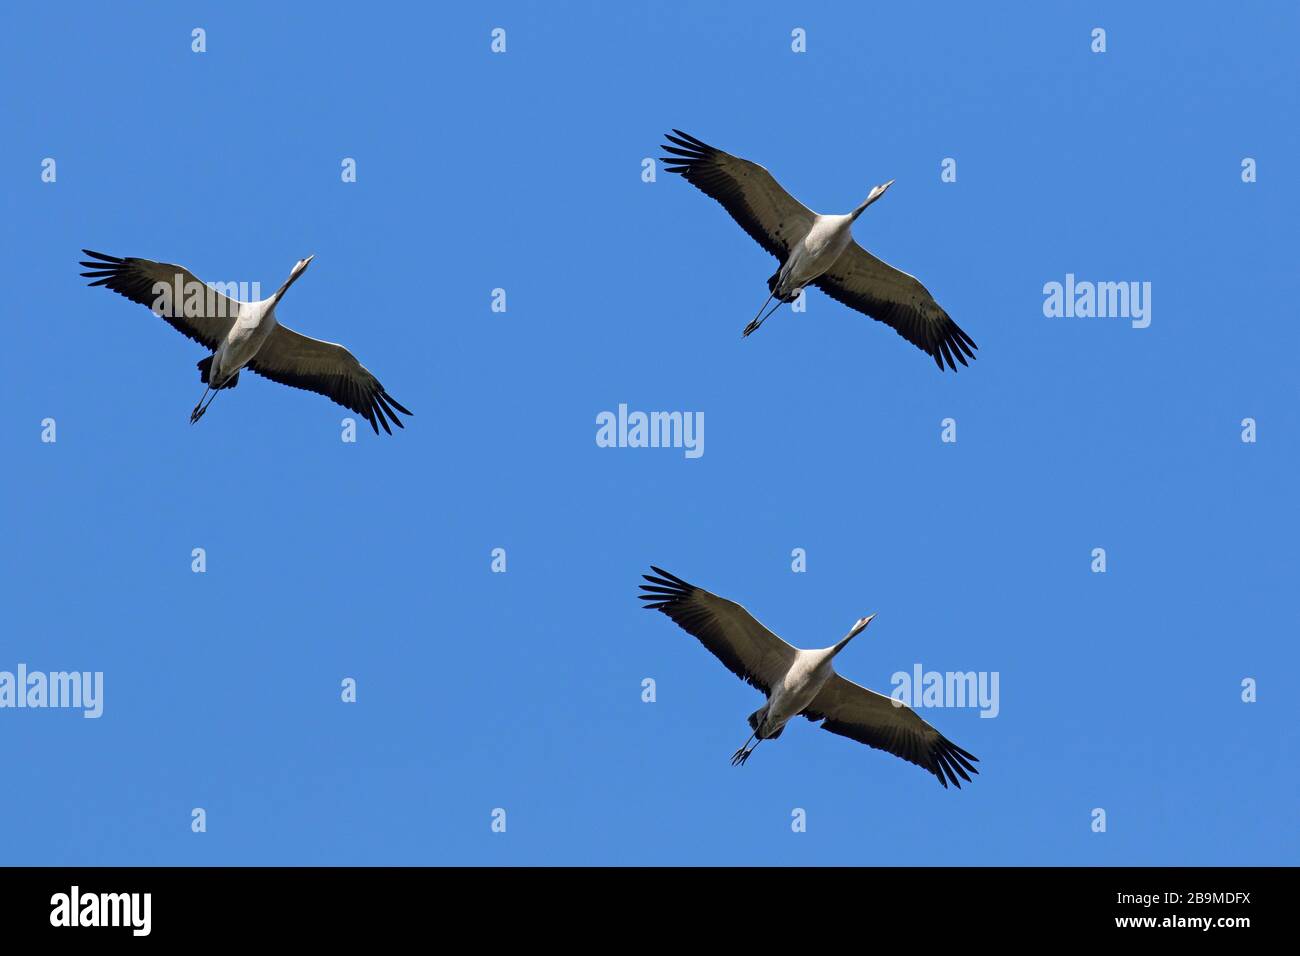 Three migrating common cranes / Eurasian crane (Grus grus) flying / thermal soaring against blue sky during migration Stock Photo